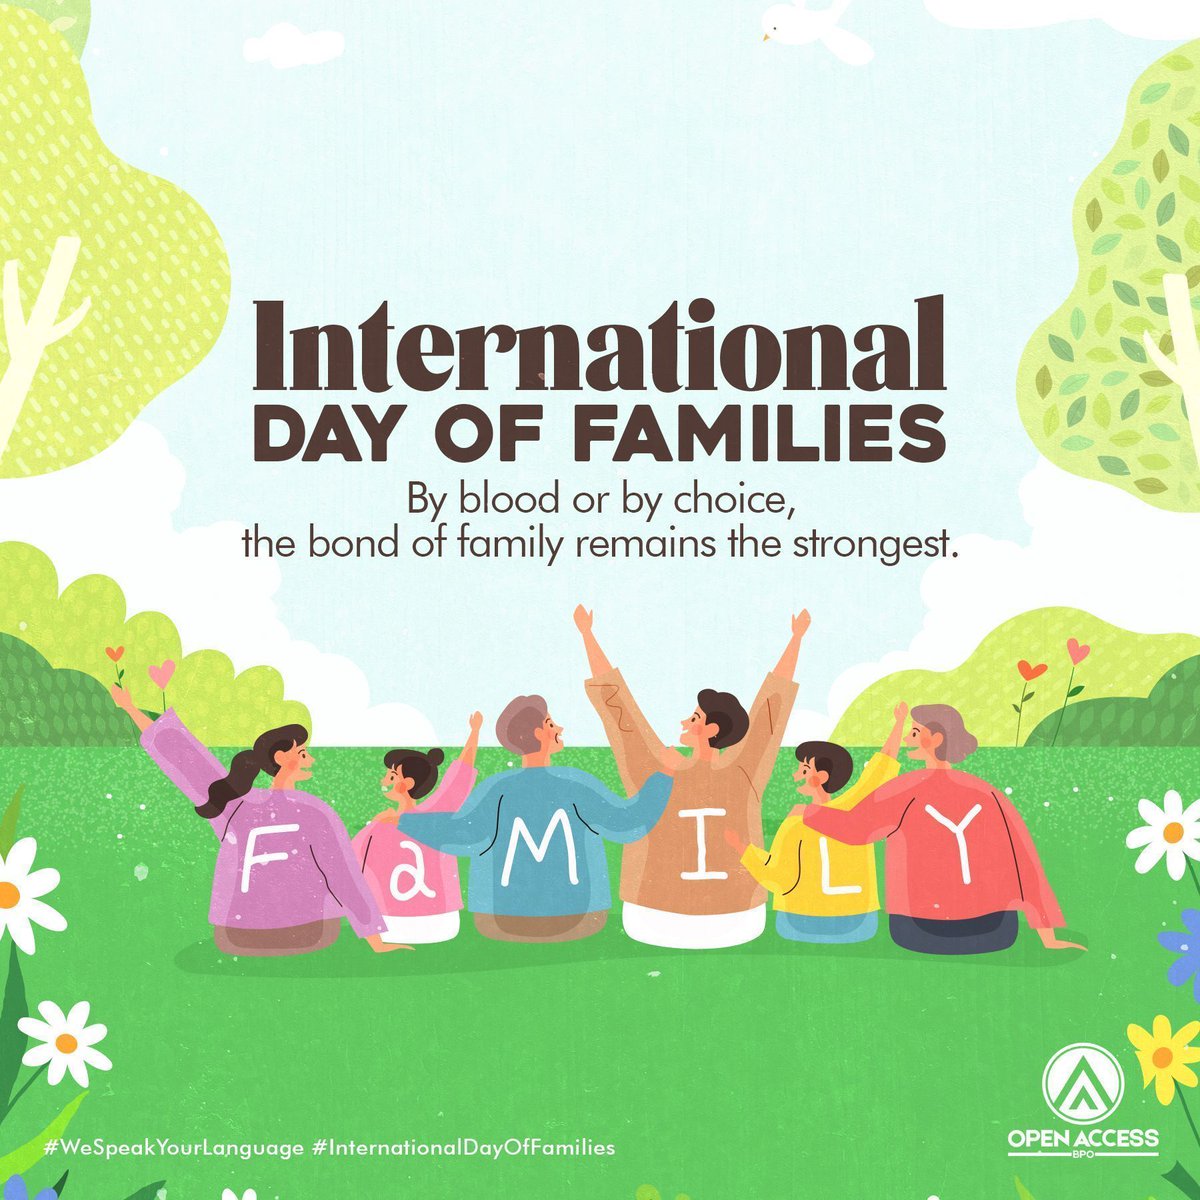 Family goes beyond blood relations; it's about the love, support, & the connection we share.

This #InternationalDayOfFamilies, let's celebrate all the kinds of families that enrich our lives and provide love, support, & understanding.

#WeSpeakYourLanguage